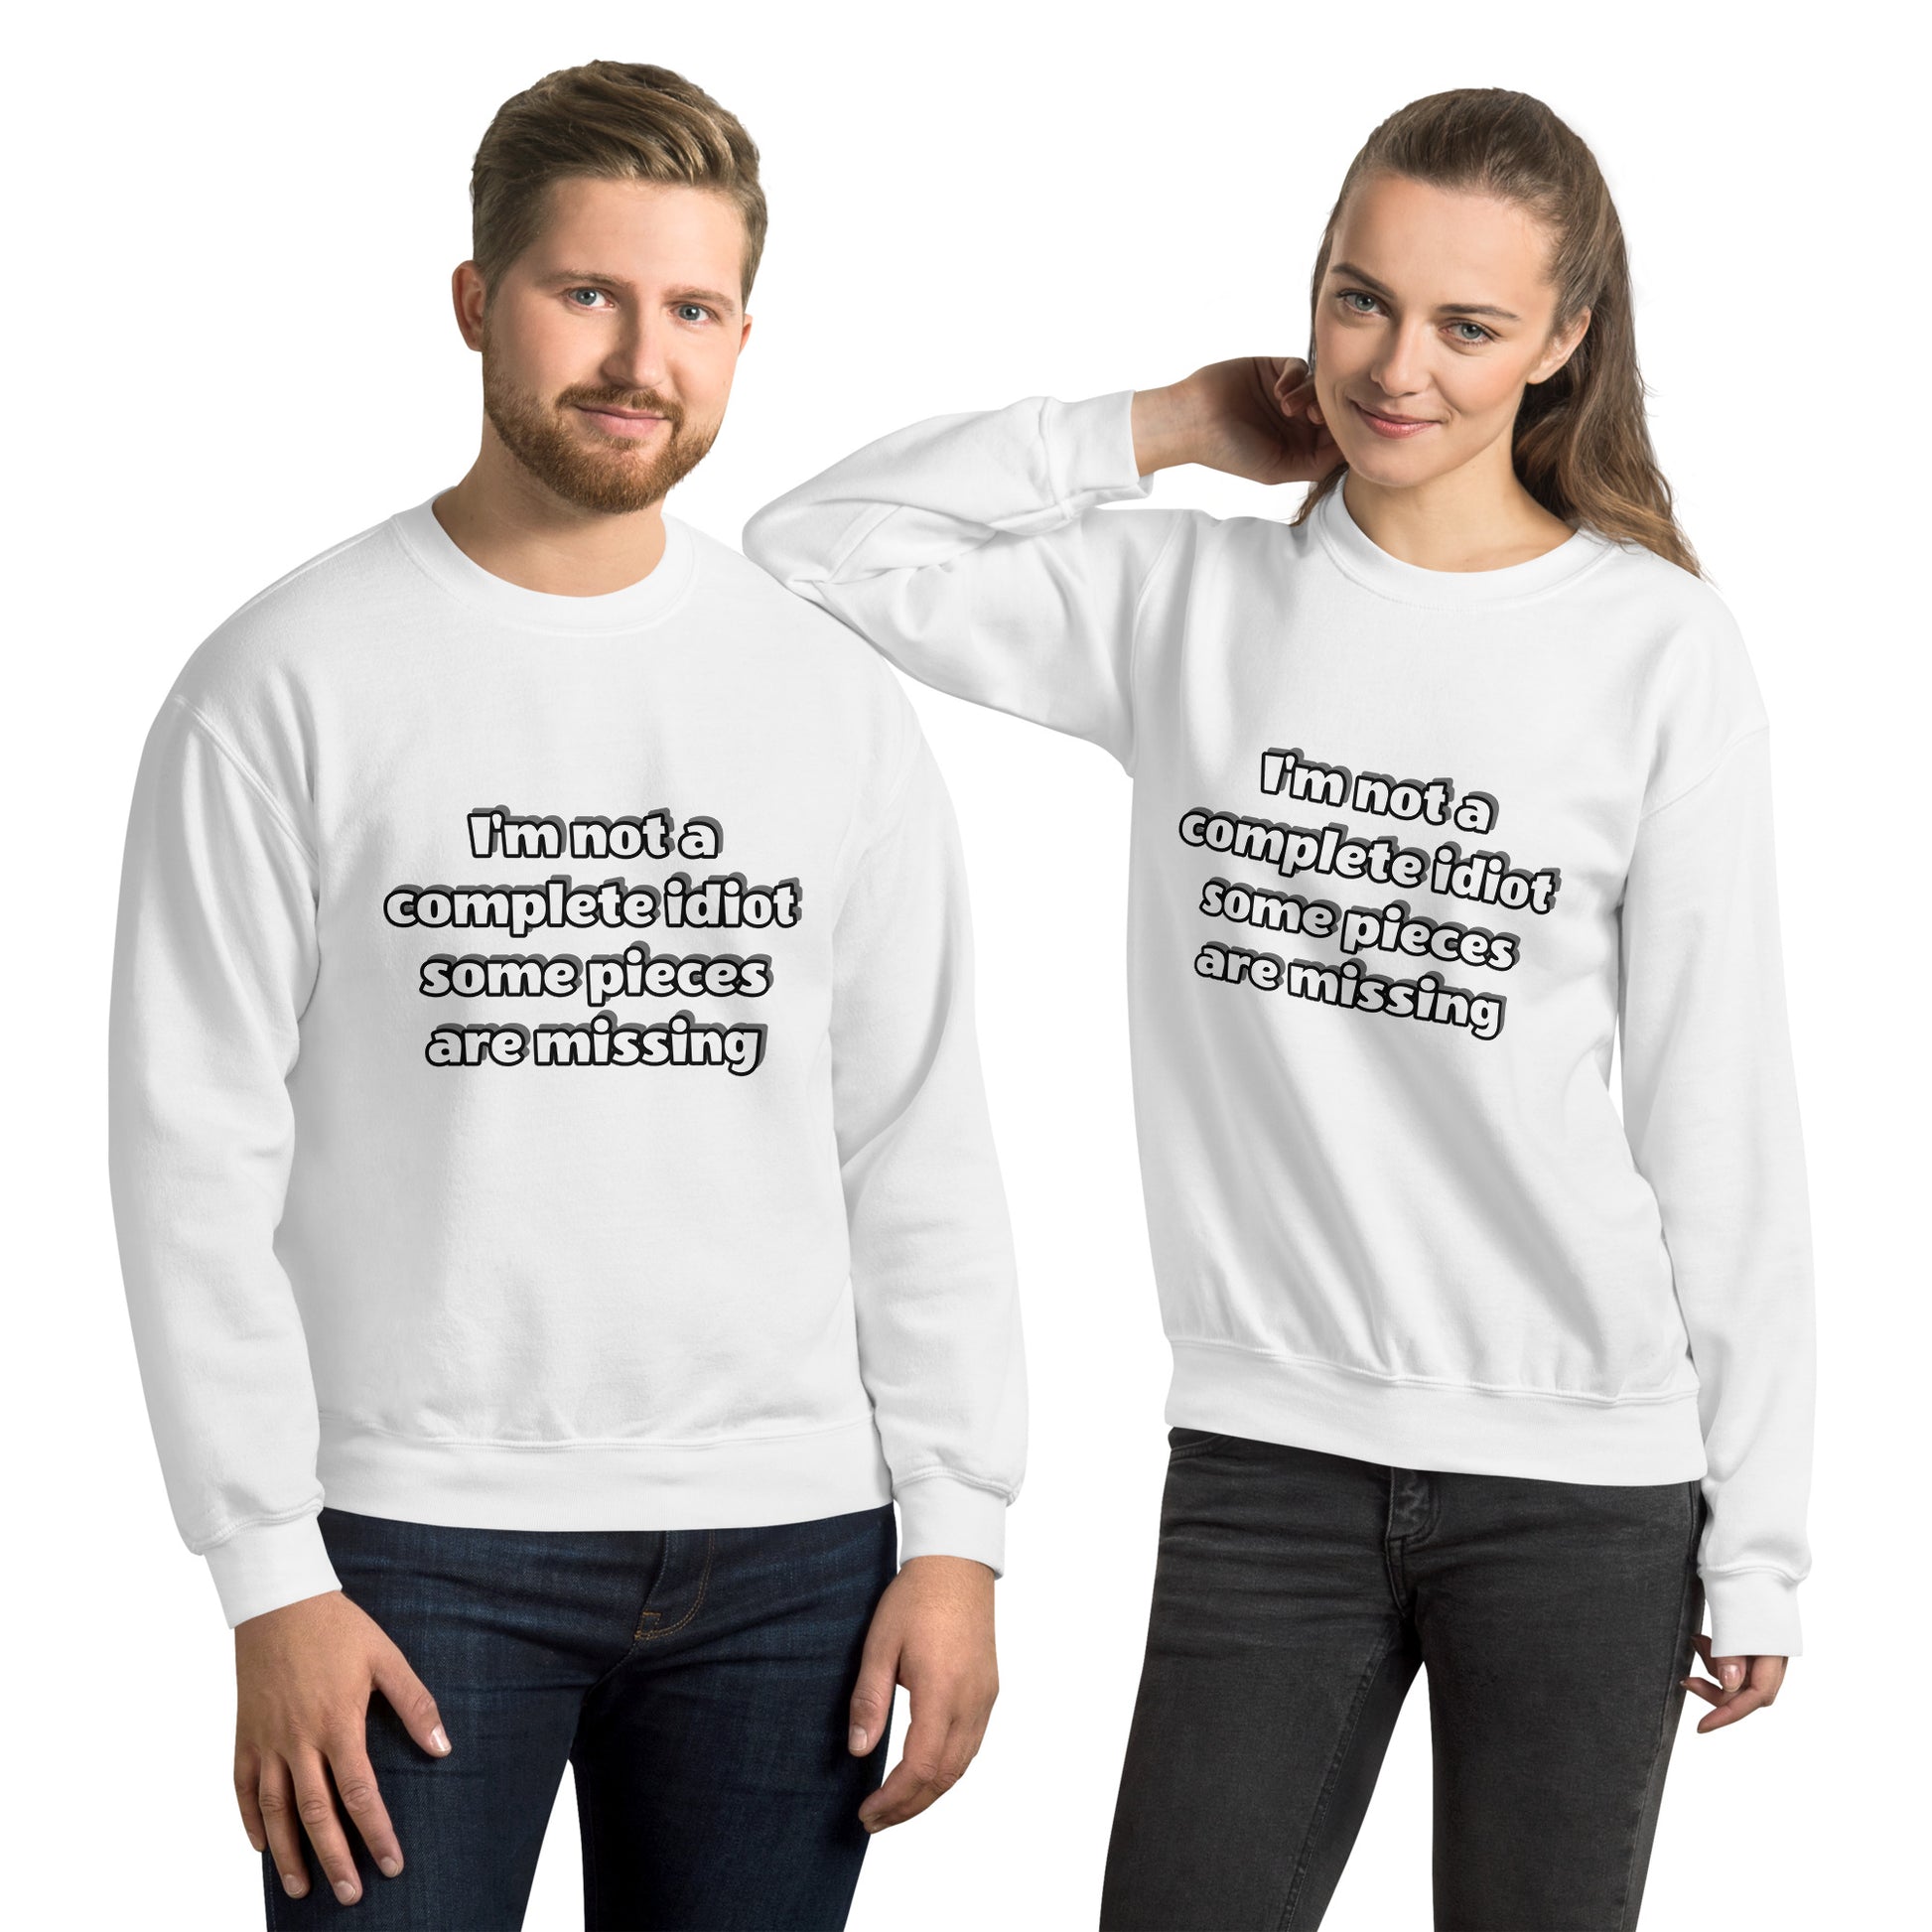 Man and women with white sweatshirt with text “I’m not a complete idiot, some pieces are missing”